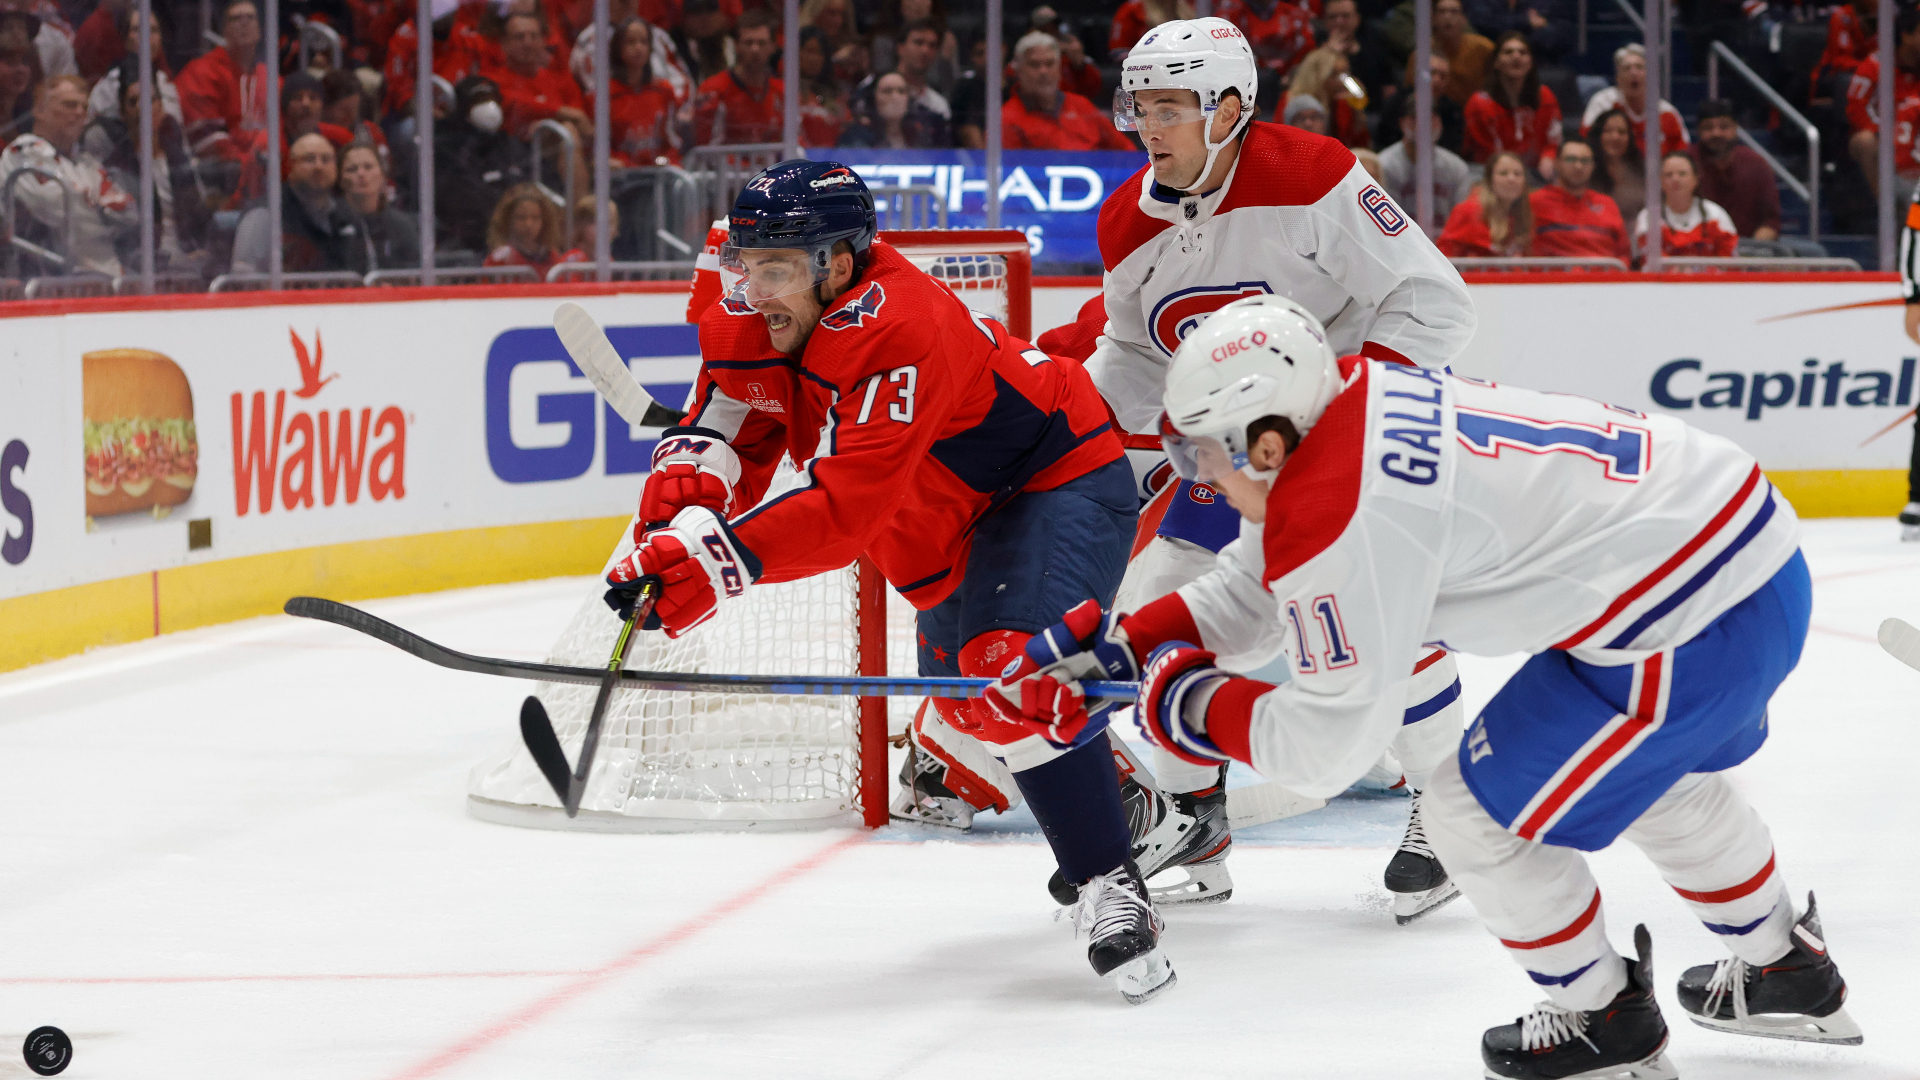 Capitals winger Conor Sheary dives for the puck in a game against the Canadiens